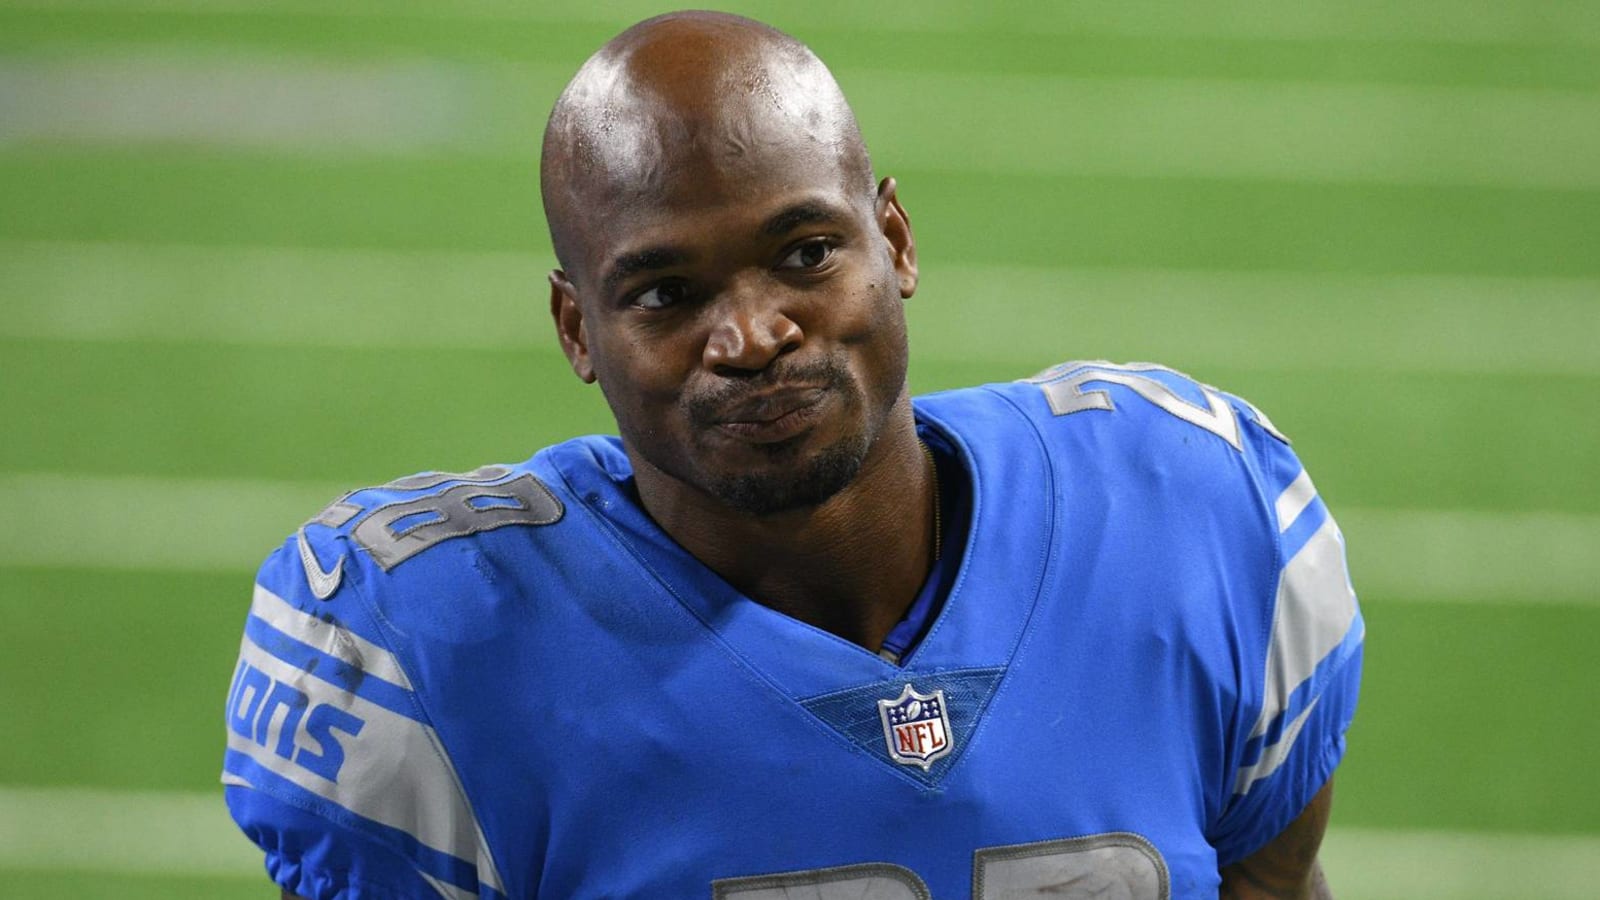 Adrian Peterson hopes to play for Bucs in 2021